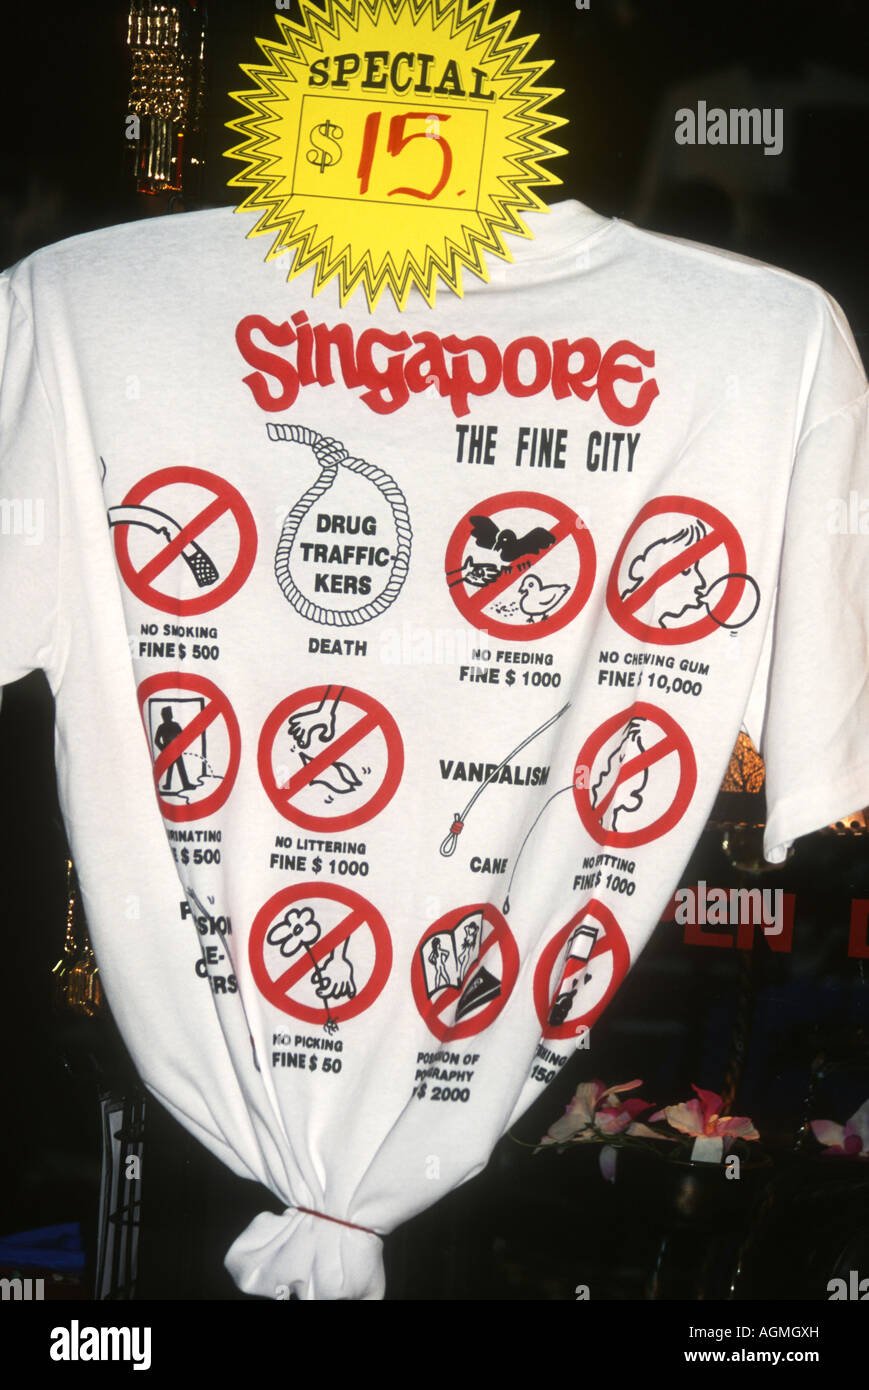 popular teeshirt documents Singapore's draconian laws and punishments Stock Photo